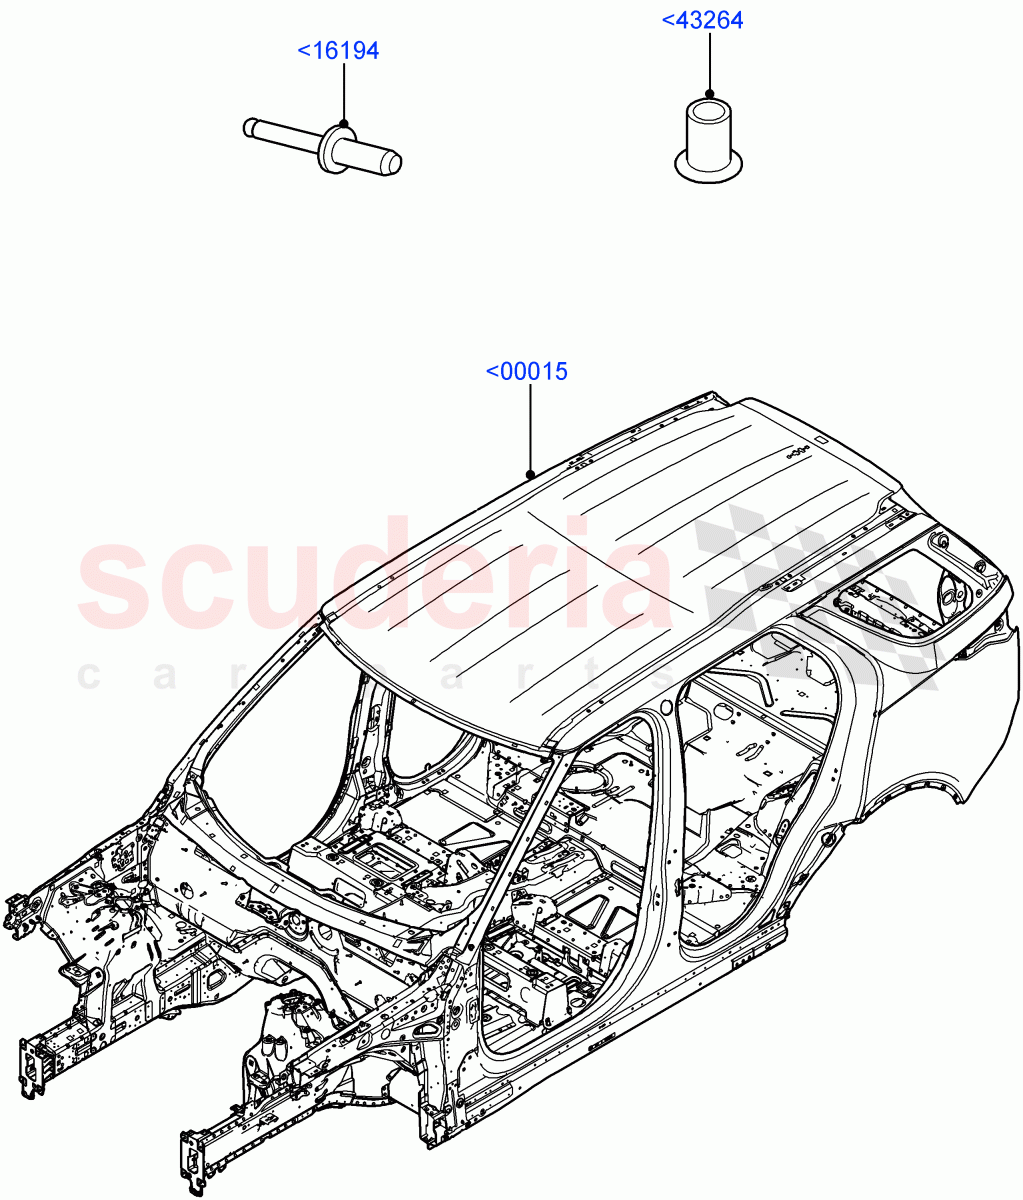 Bodyshell(Nitra Plant Build)((V)FROMK2000001) of Land Rover Land Rover Discovery 5 (2017+) [3.0 DOHC GDI SC V6 Petrol]